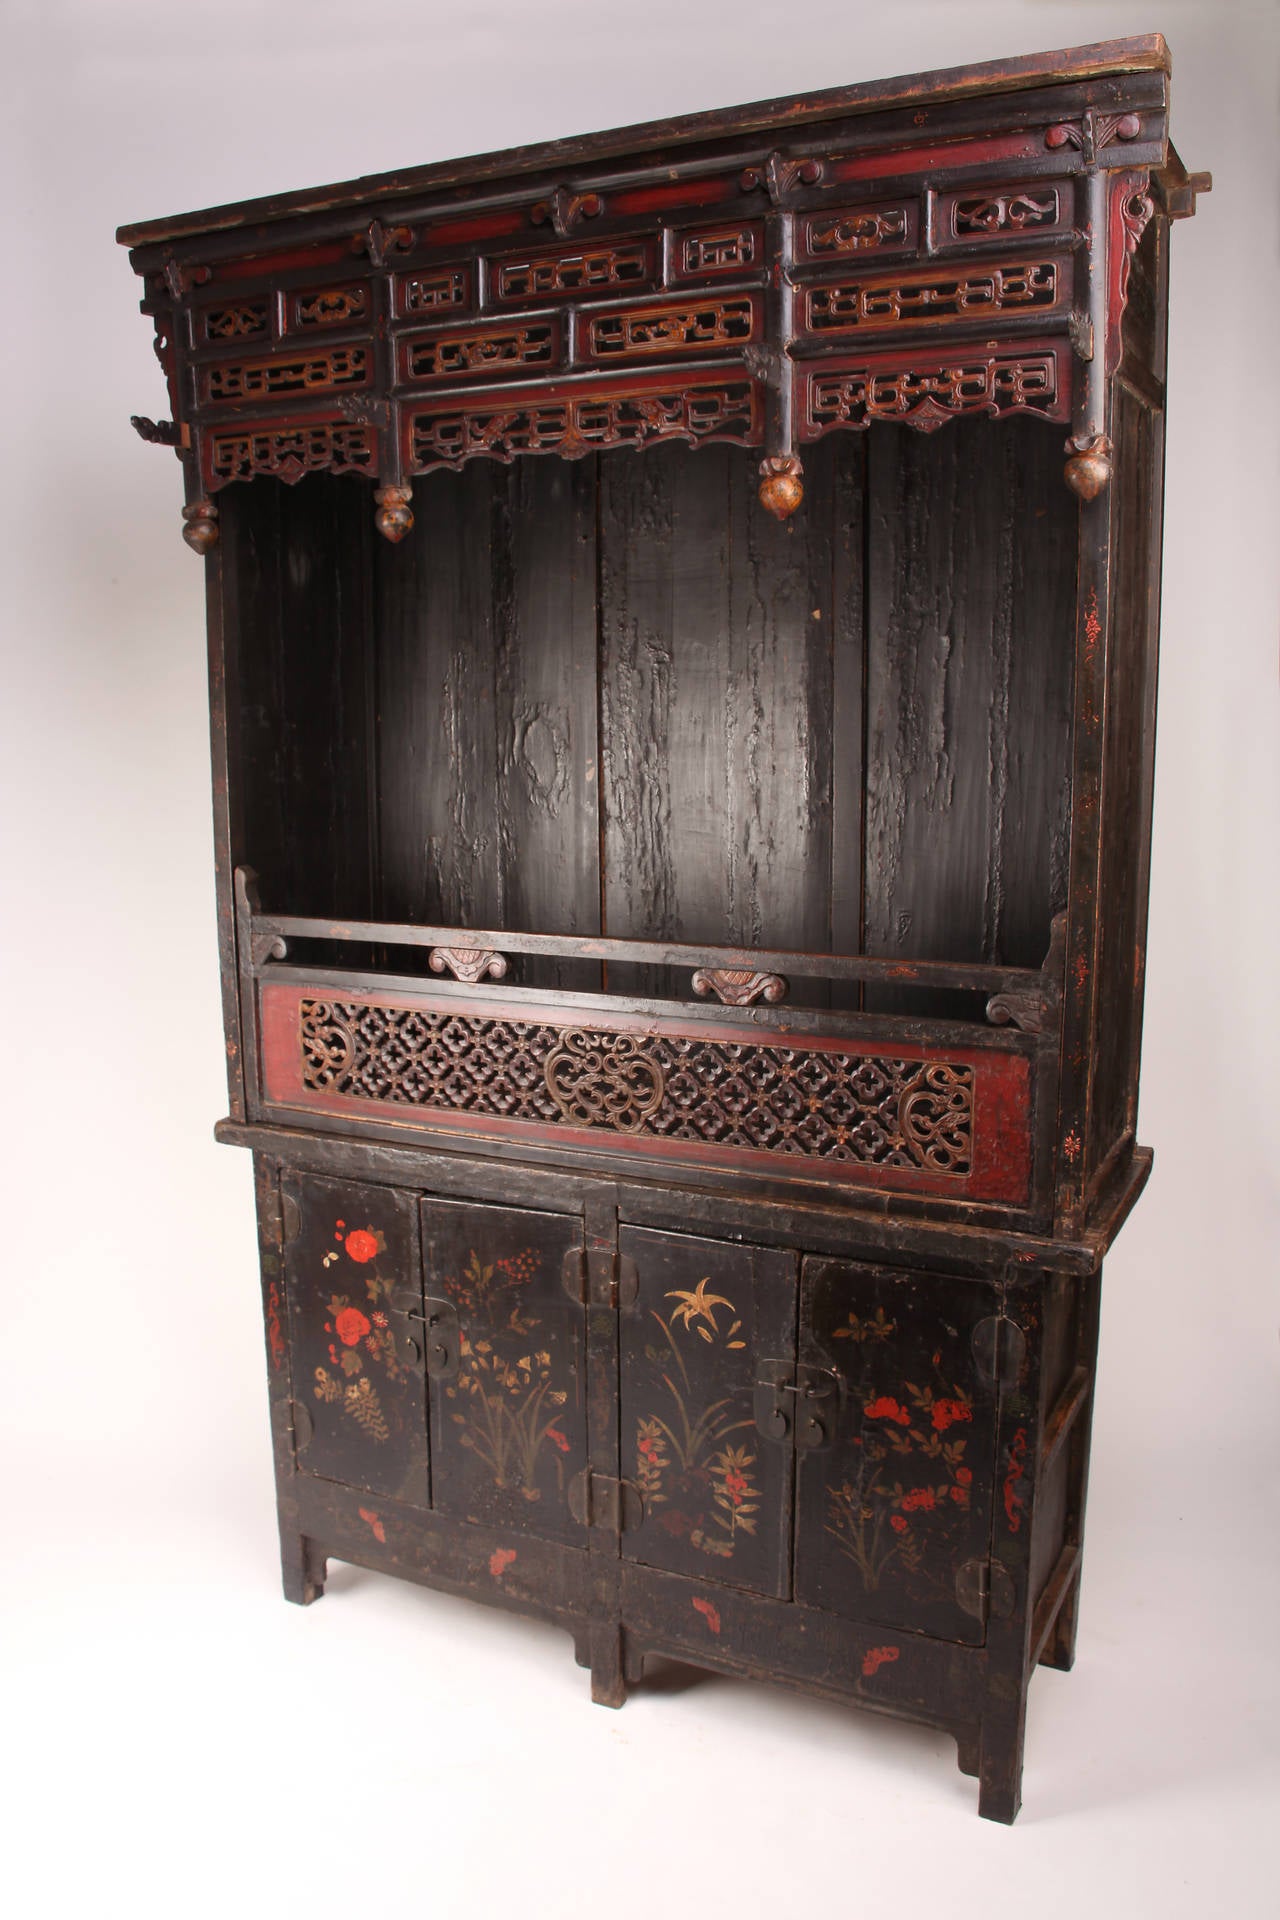 Made from black and red lacquered Elm Wood, this shrine is multifunctional as both a display and storage cabinet.

The top piece is decorated with segmented cloud-form openwork panels and hanging spandrel. The central latticework panel is carved